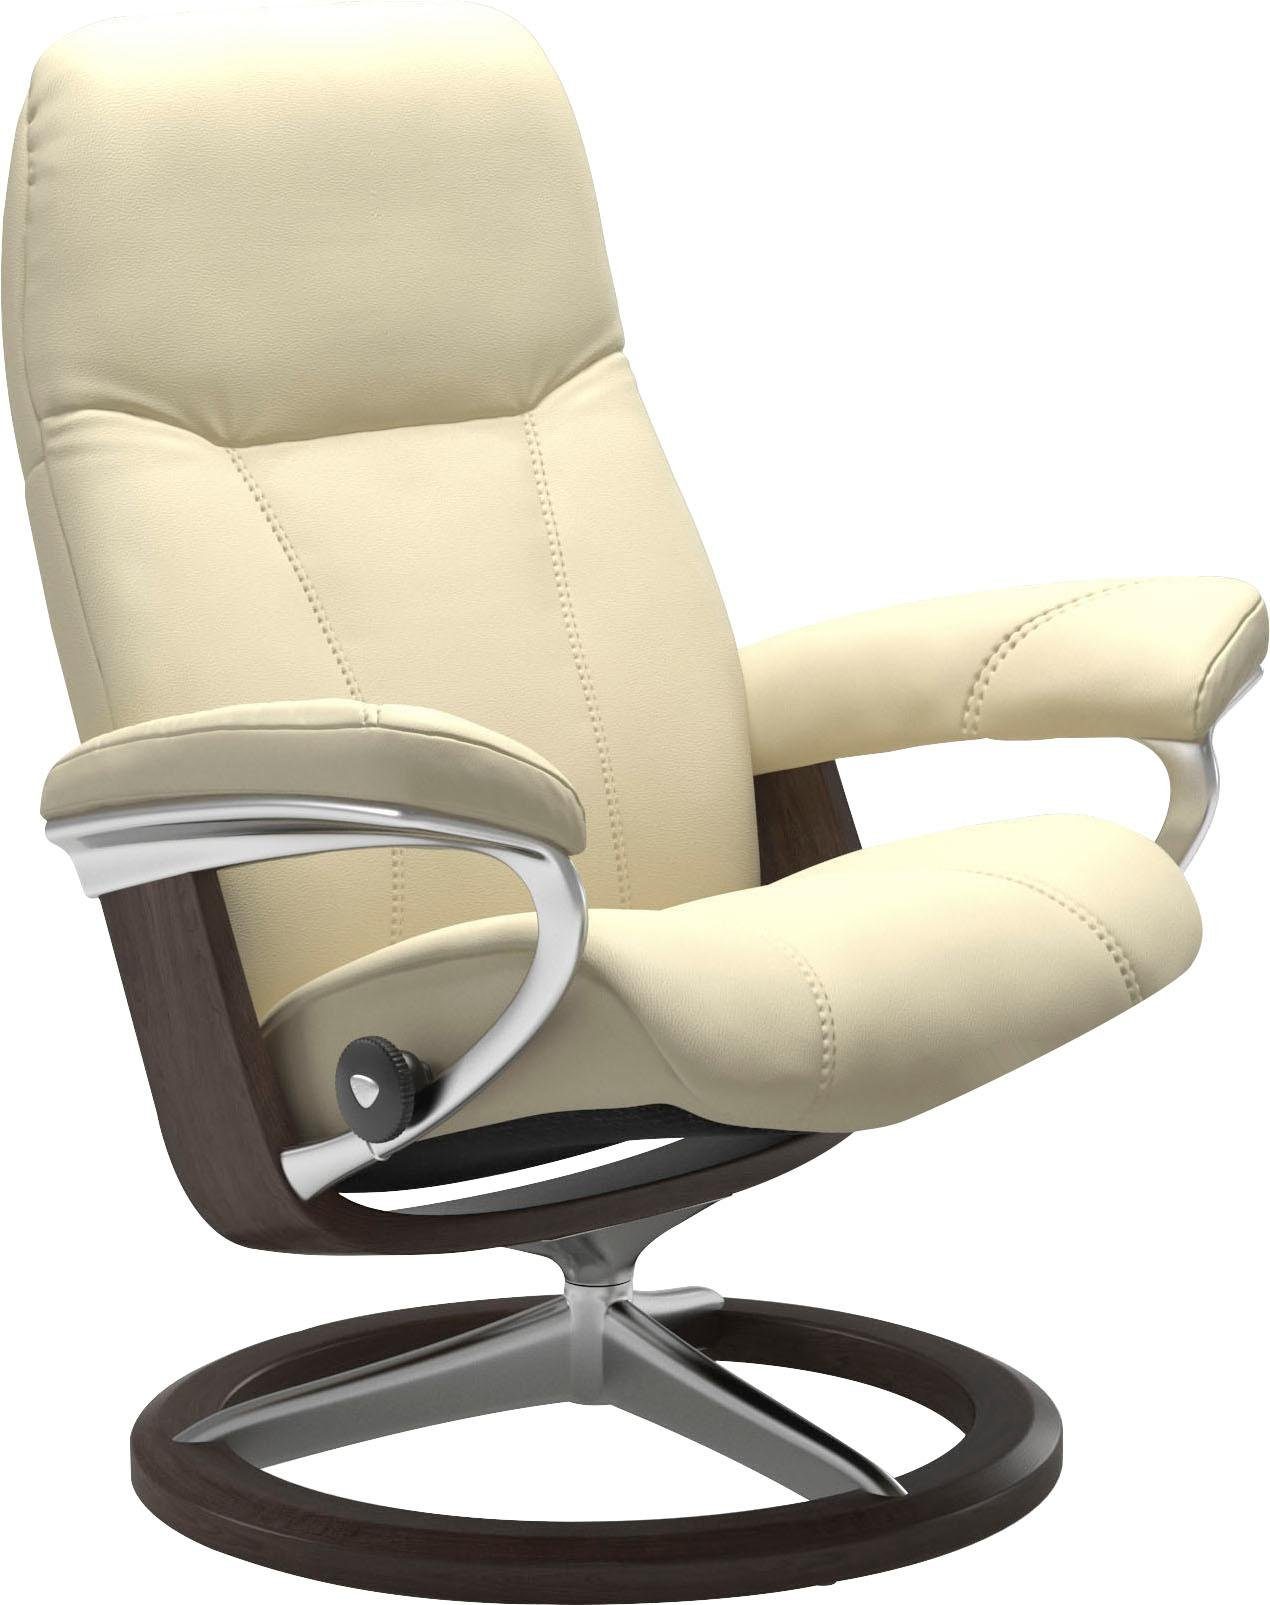 Consul, Gestell mit Wenge L, Base, Signature Stressless® Größe Relaxsessel